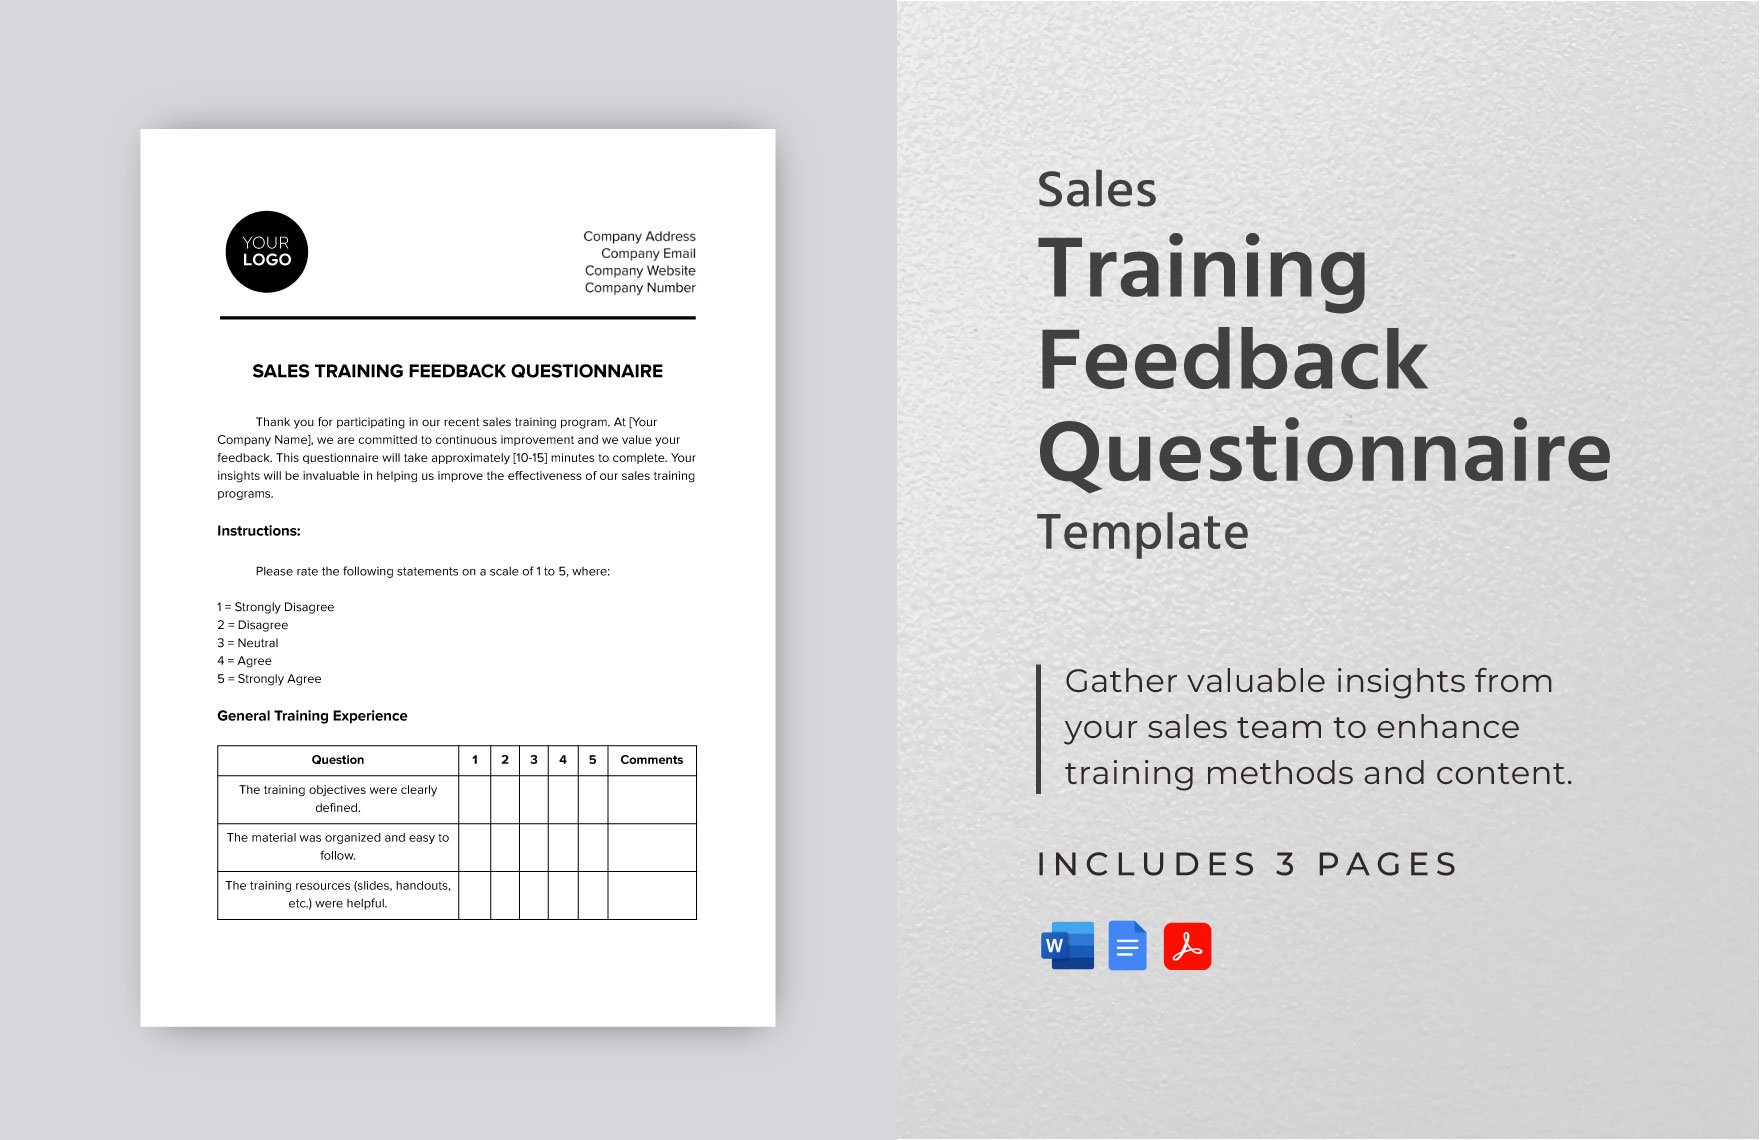 Sales Training Feedback Questionnaire Template in Word, Google Docs, PDF